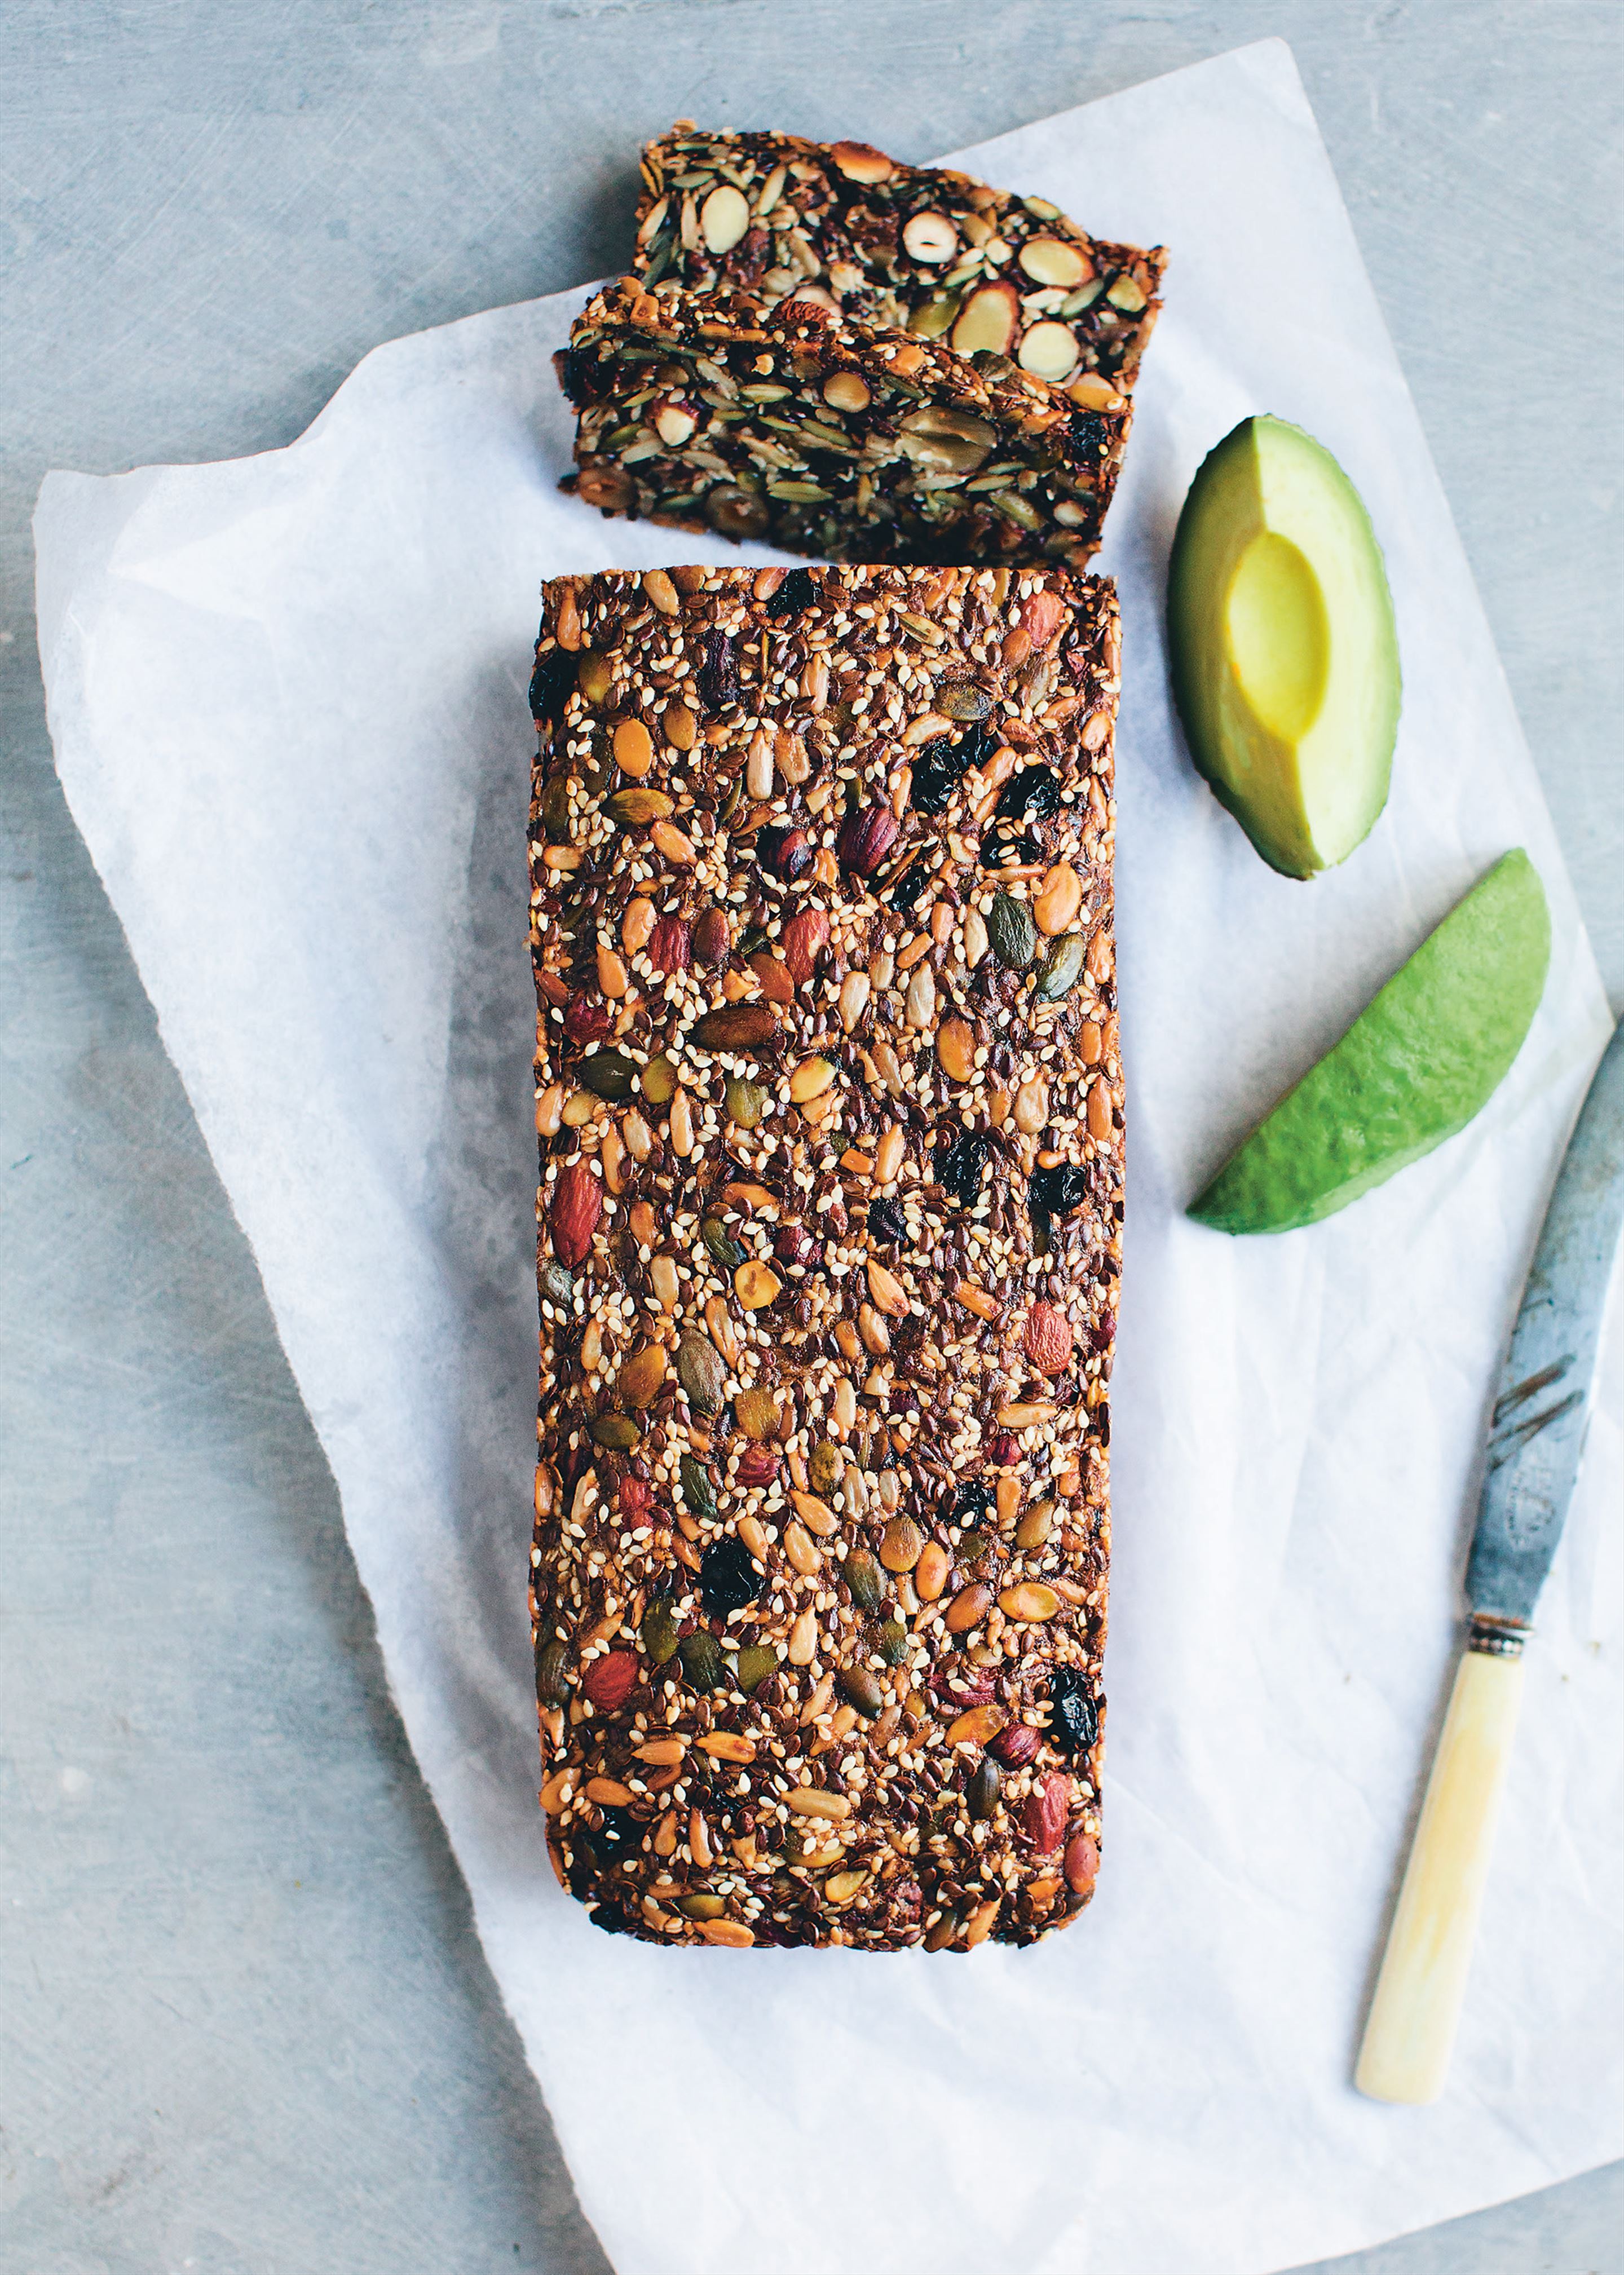 Vegan nut and seed bread